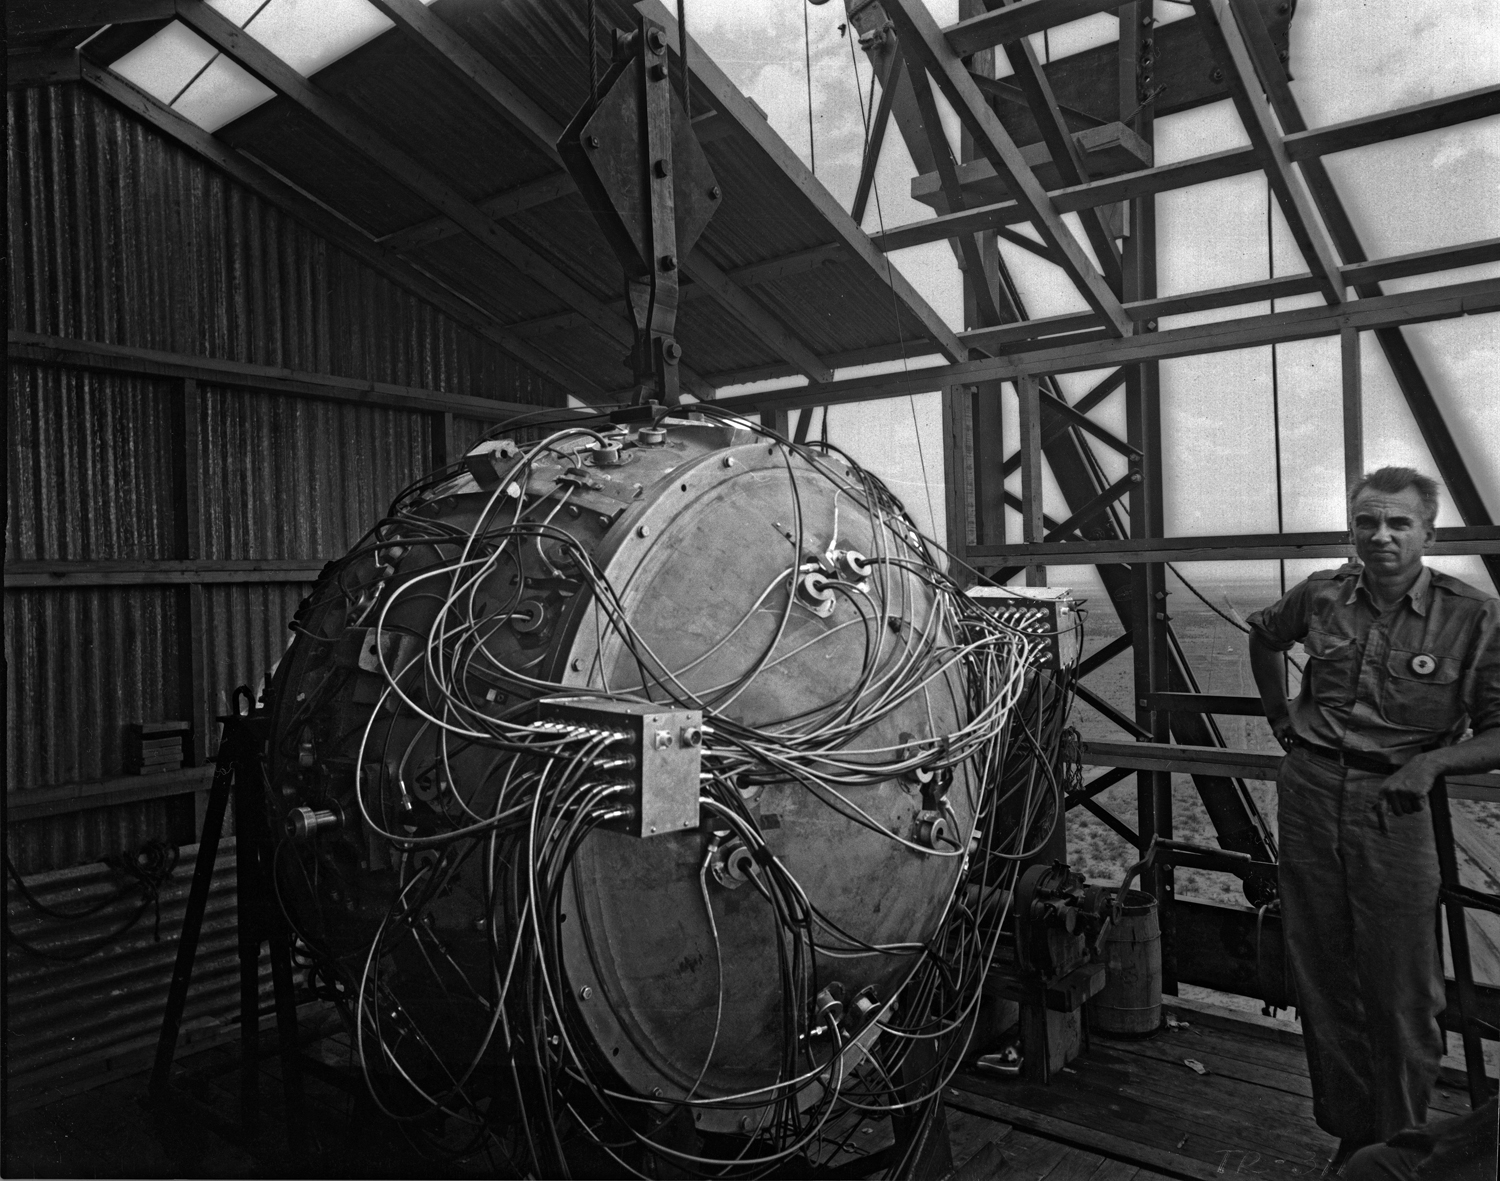 The assembled implosion “gadget” of the Trinity test, July 1945, with physicist Norris Bradbury for scale